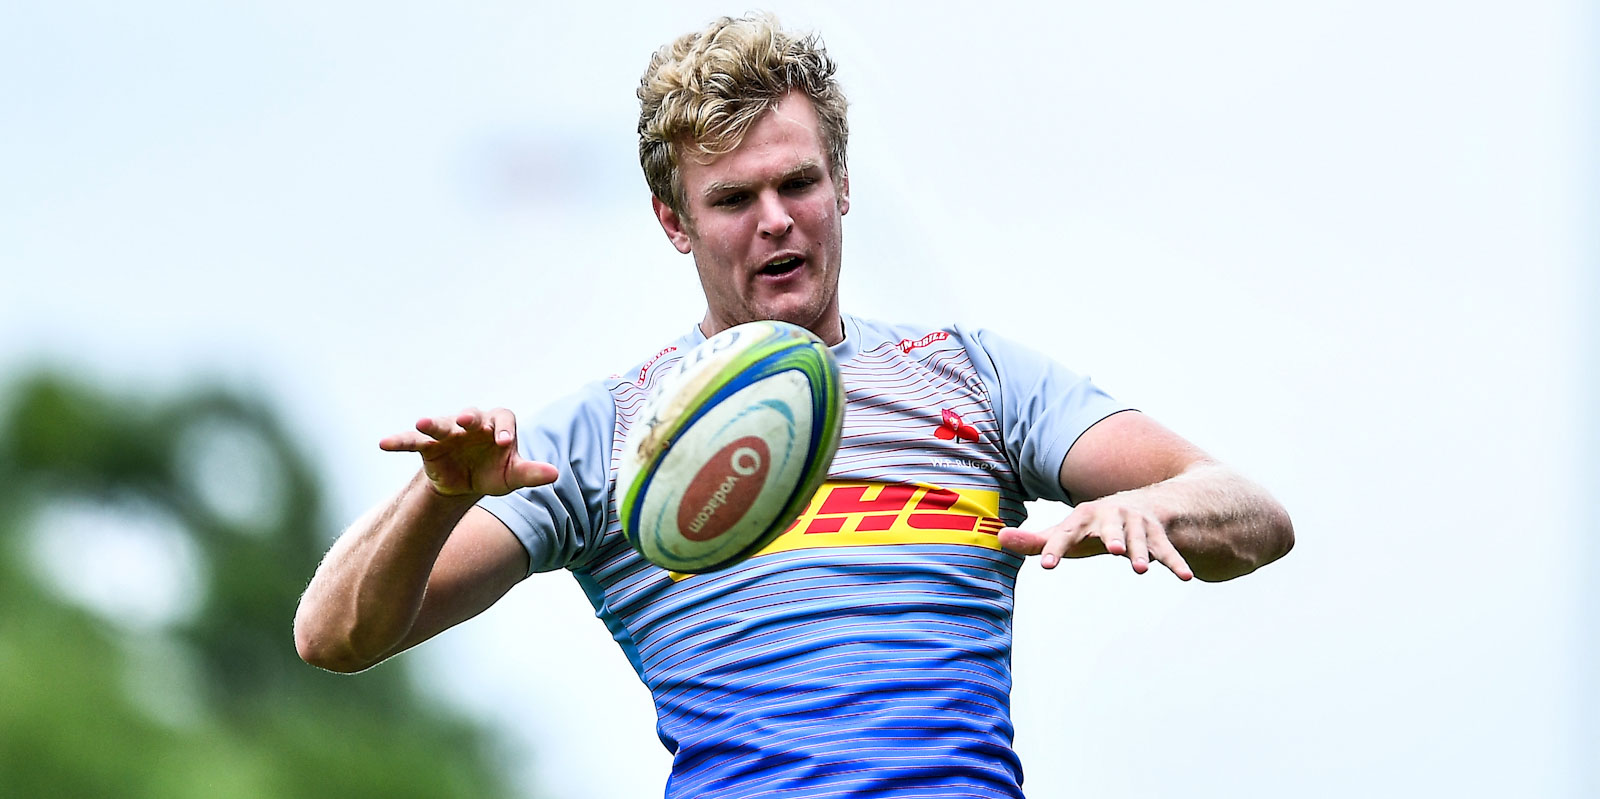 David Meihuizen will run out at lock for DHL WP